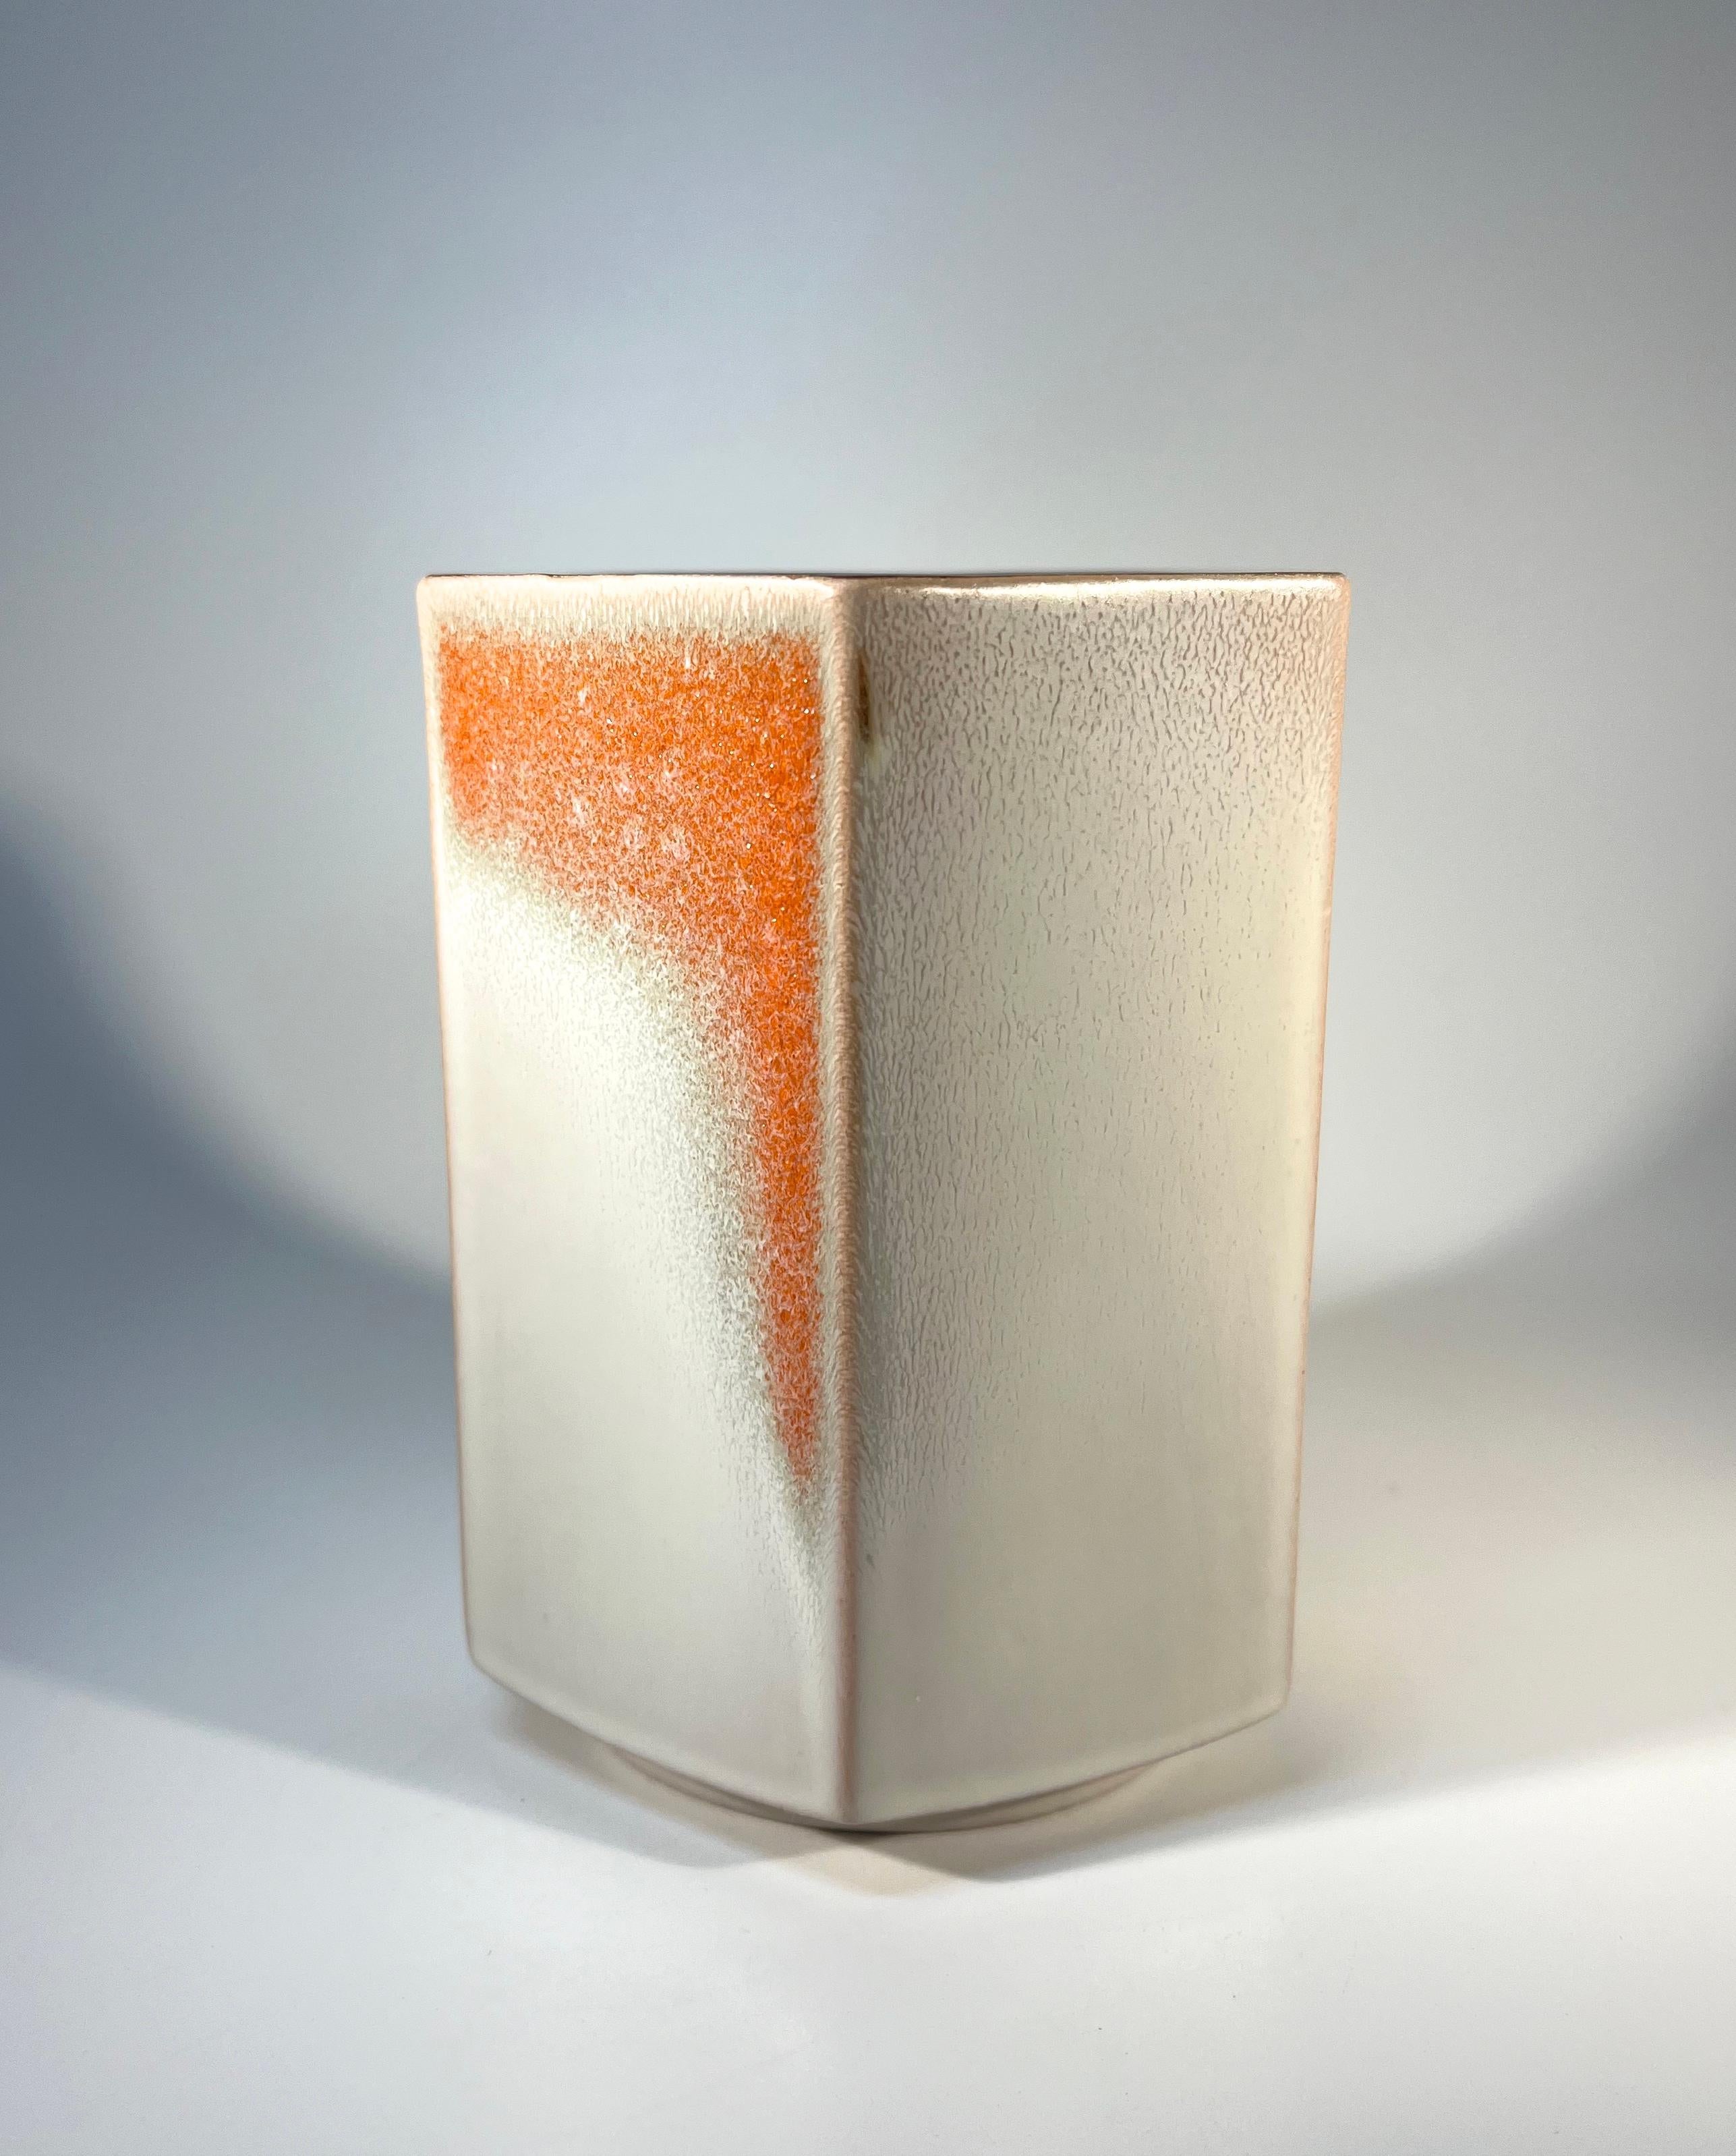 Hexagonal white and terracotta glazed vase by Knabstrup, Denmark 
Rich dark brown glazed interior
Circa 1960-65
Signed Knabstrup to base
Height 4.75 inch, Width 3.75 inch, Depth 3.75 inch
In good condition, minor fleabite on outer lower angle -